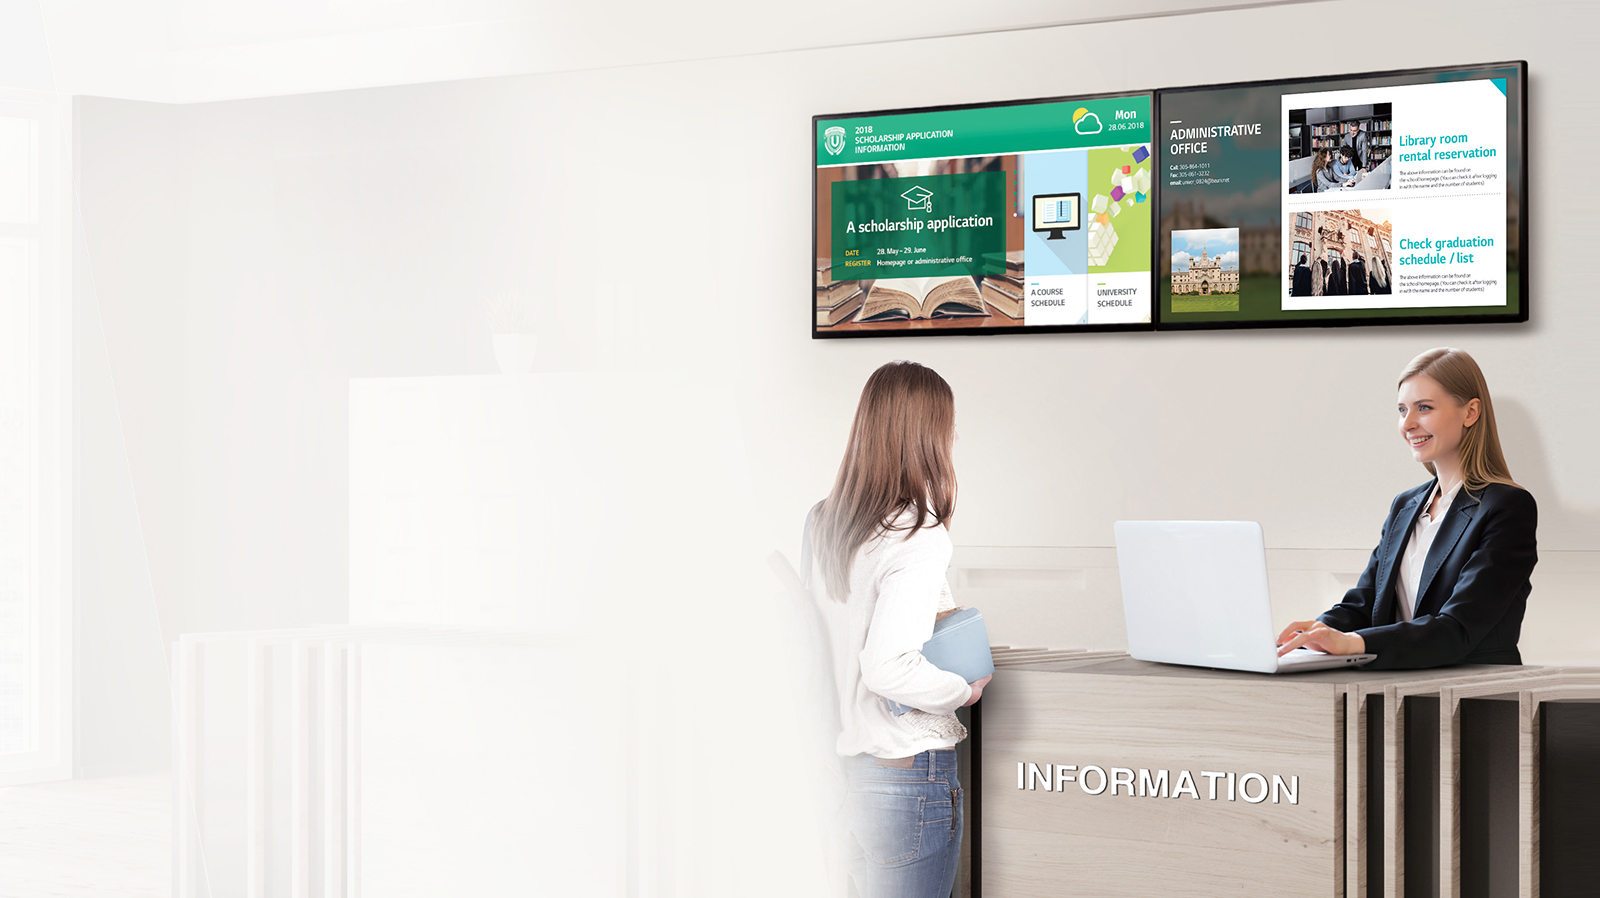 Two LG commercial displays mounted behind an information kiosk that two women are at